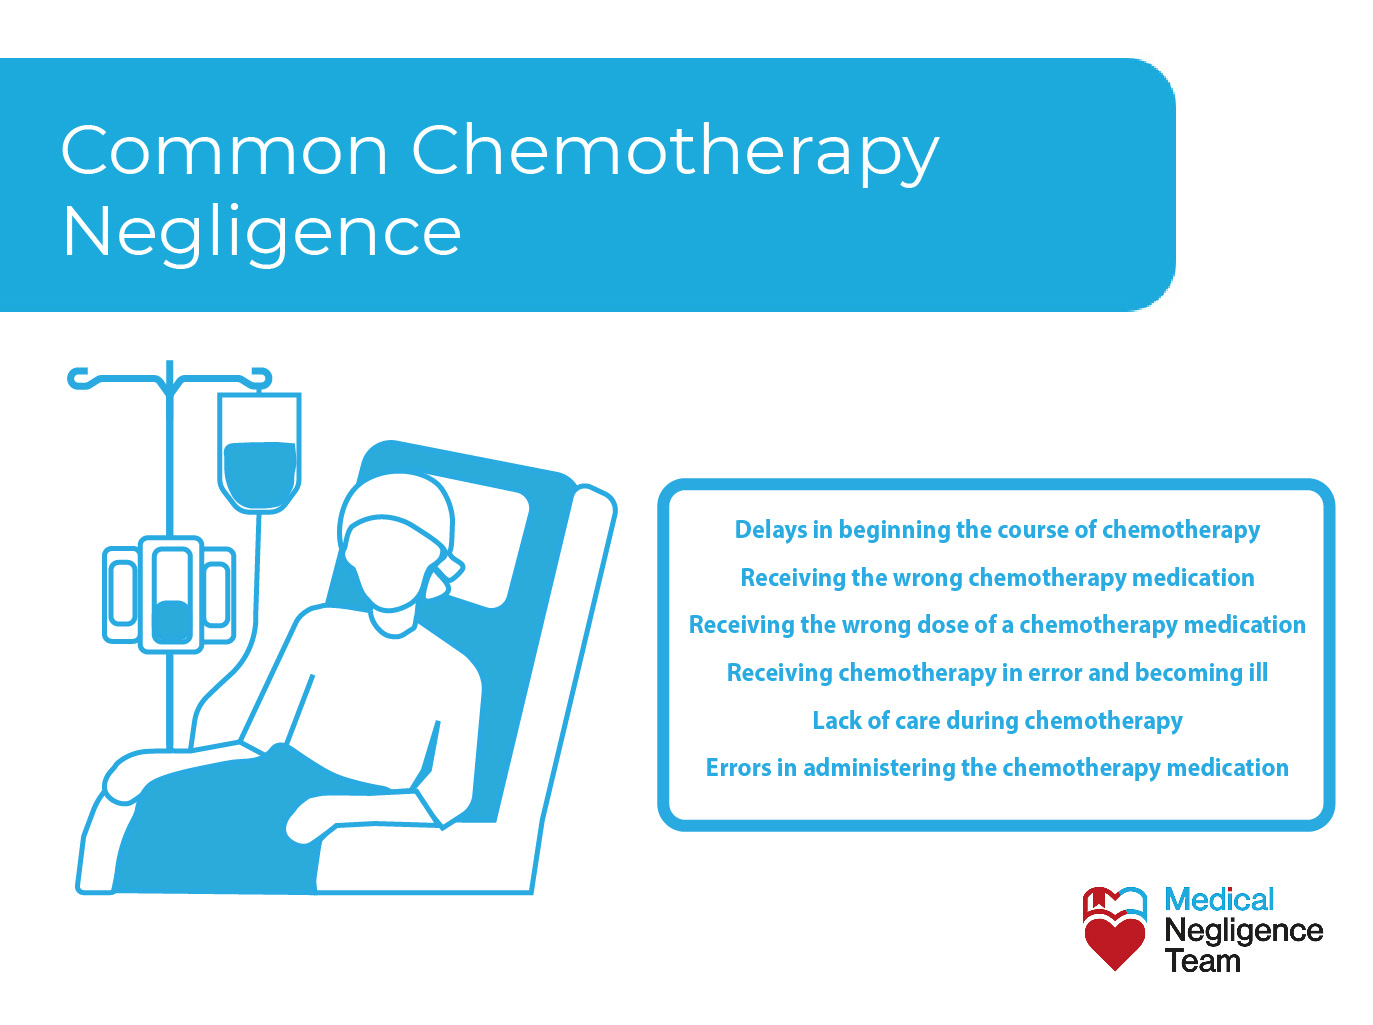 Common claims for chemotherapy negligence